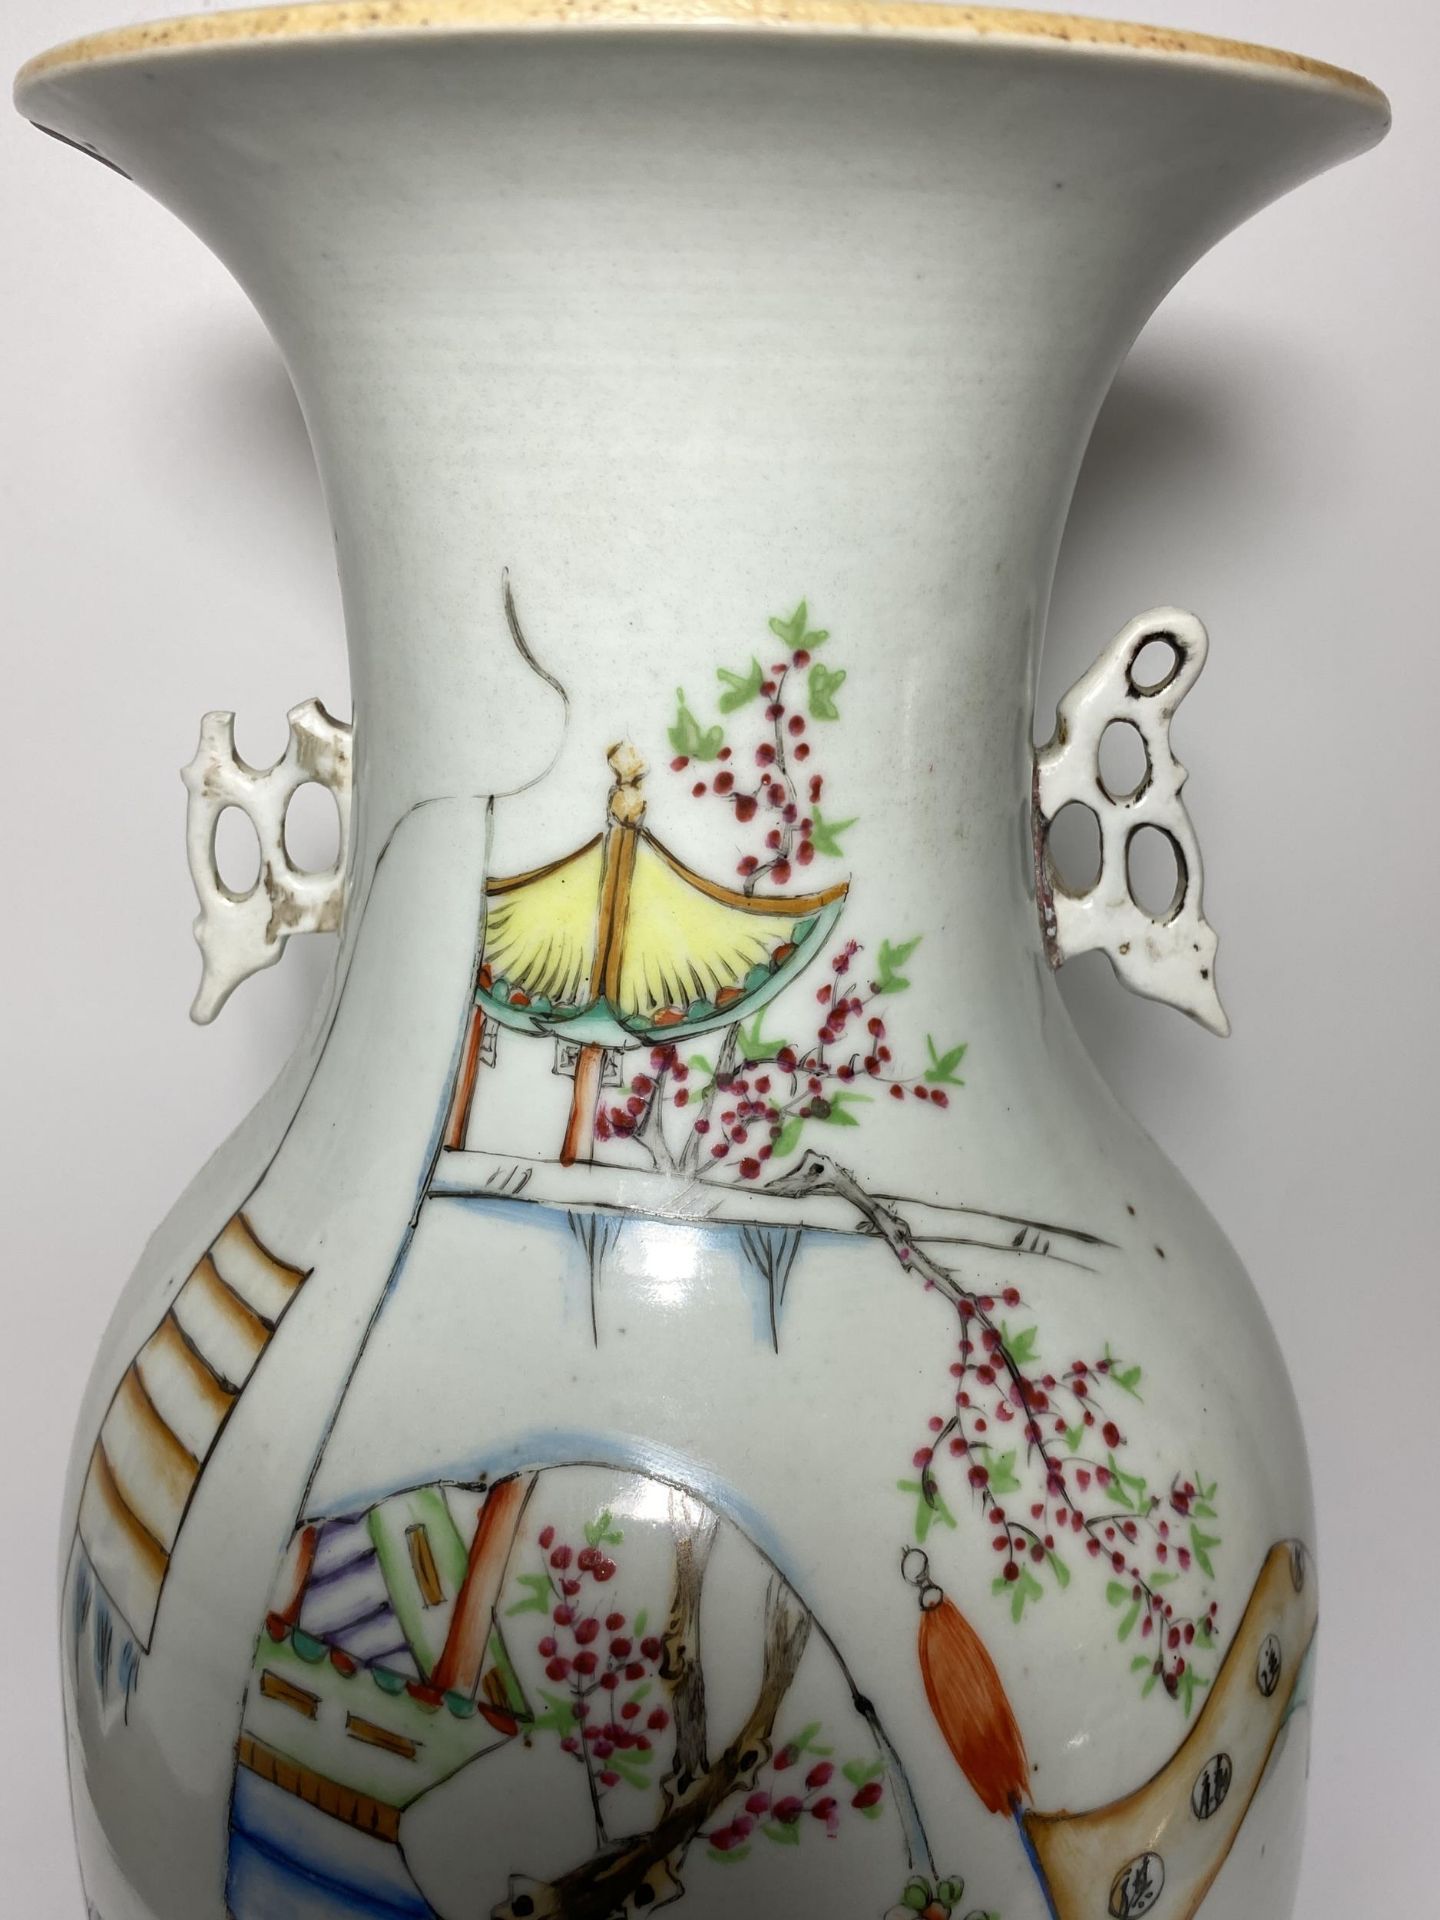 A LARGE 19TH CENTURY CHINESE QING PORCELAIN VASE WITH FIGURAL & CALLIGRAPHY DESIGN, HEIGHT 43CM - Image 3 of 11